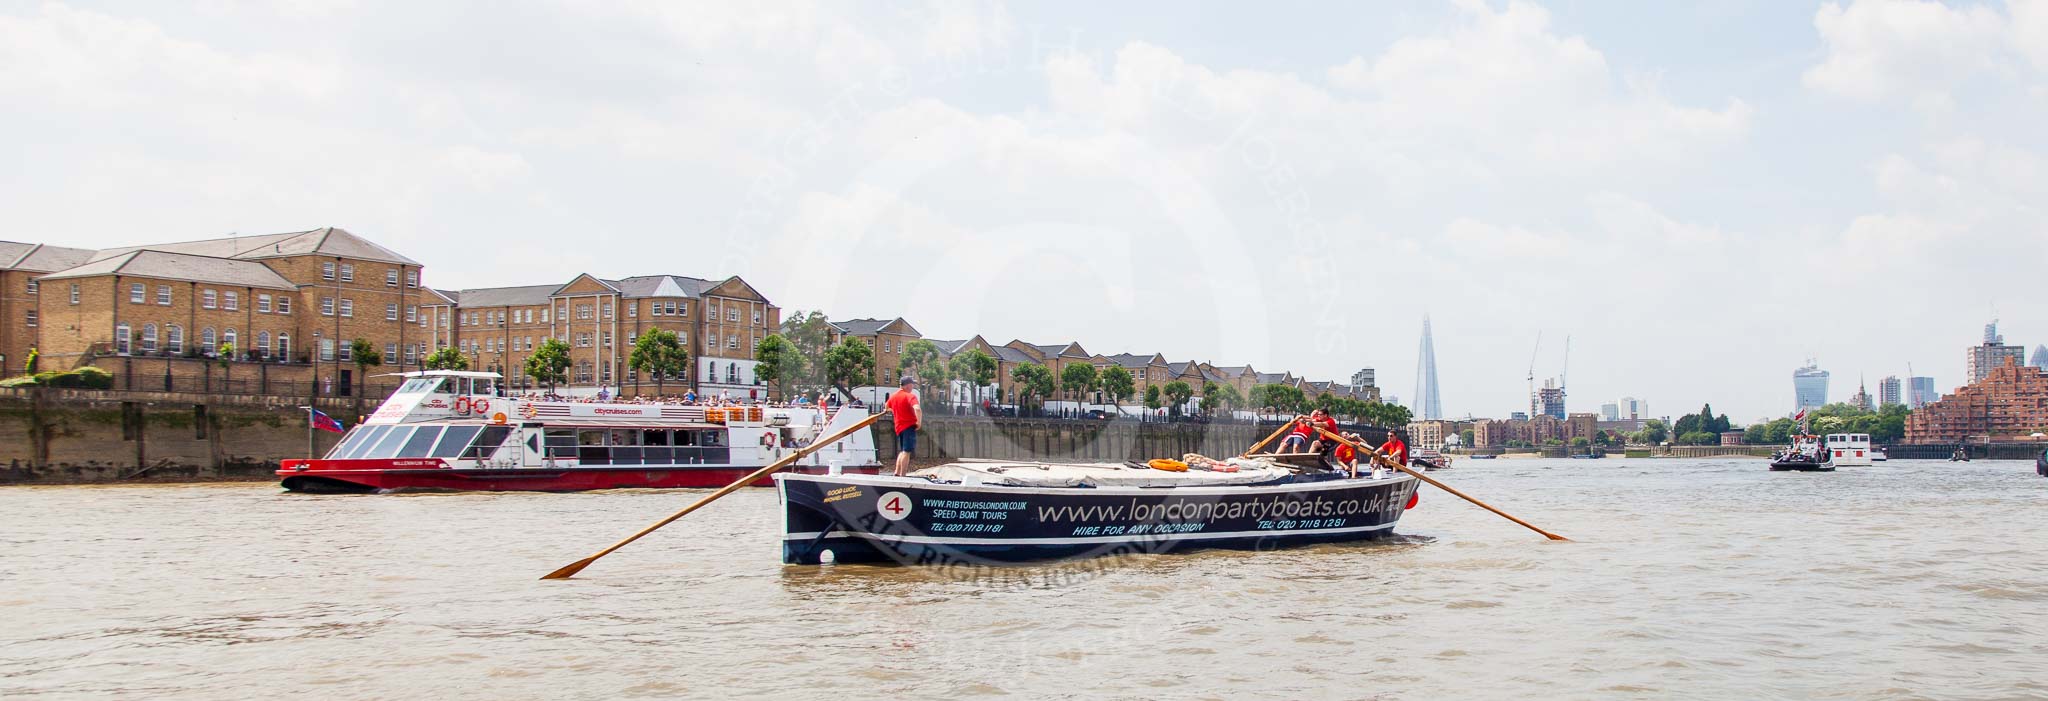 TOW River Thames Barge Driving Race 2013: Barge "Steve Faldo" by Capital Pleasure Boats..
River Thames between Greenwich and Westminster,
London,

United Kingdom,
on 13 July 2013 at 13:17, image #308